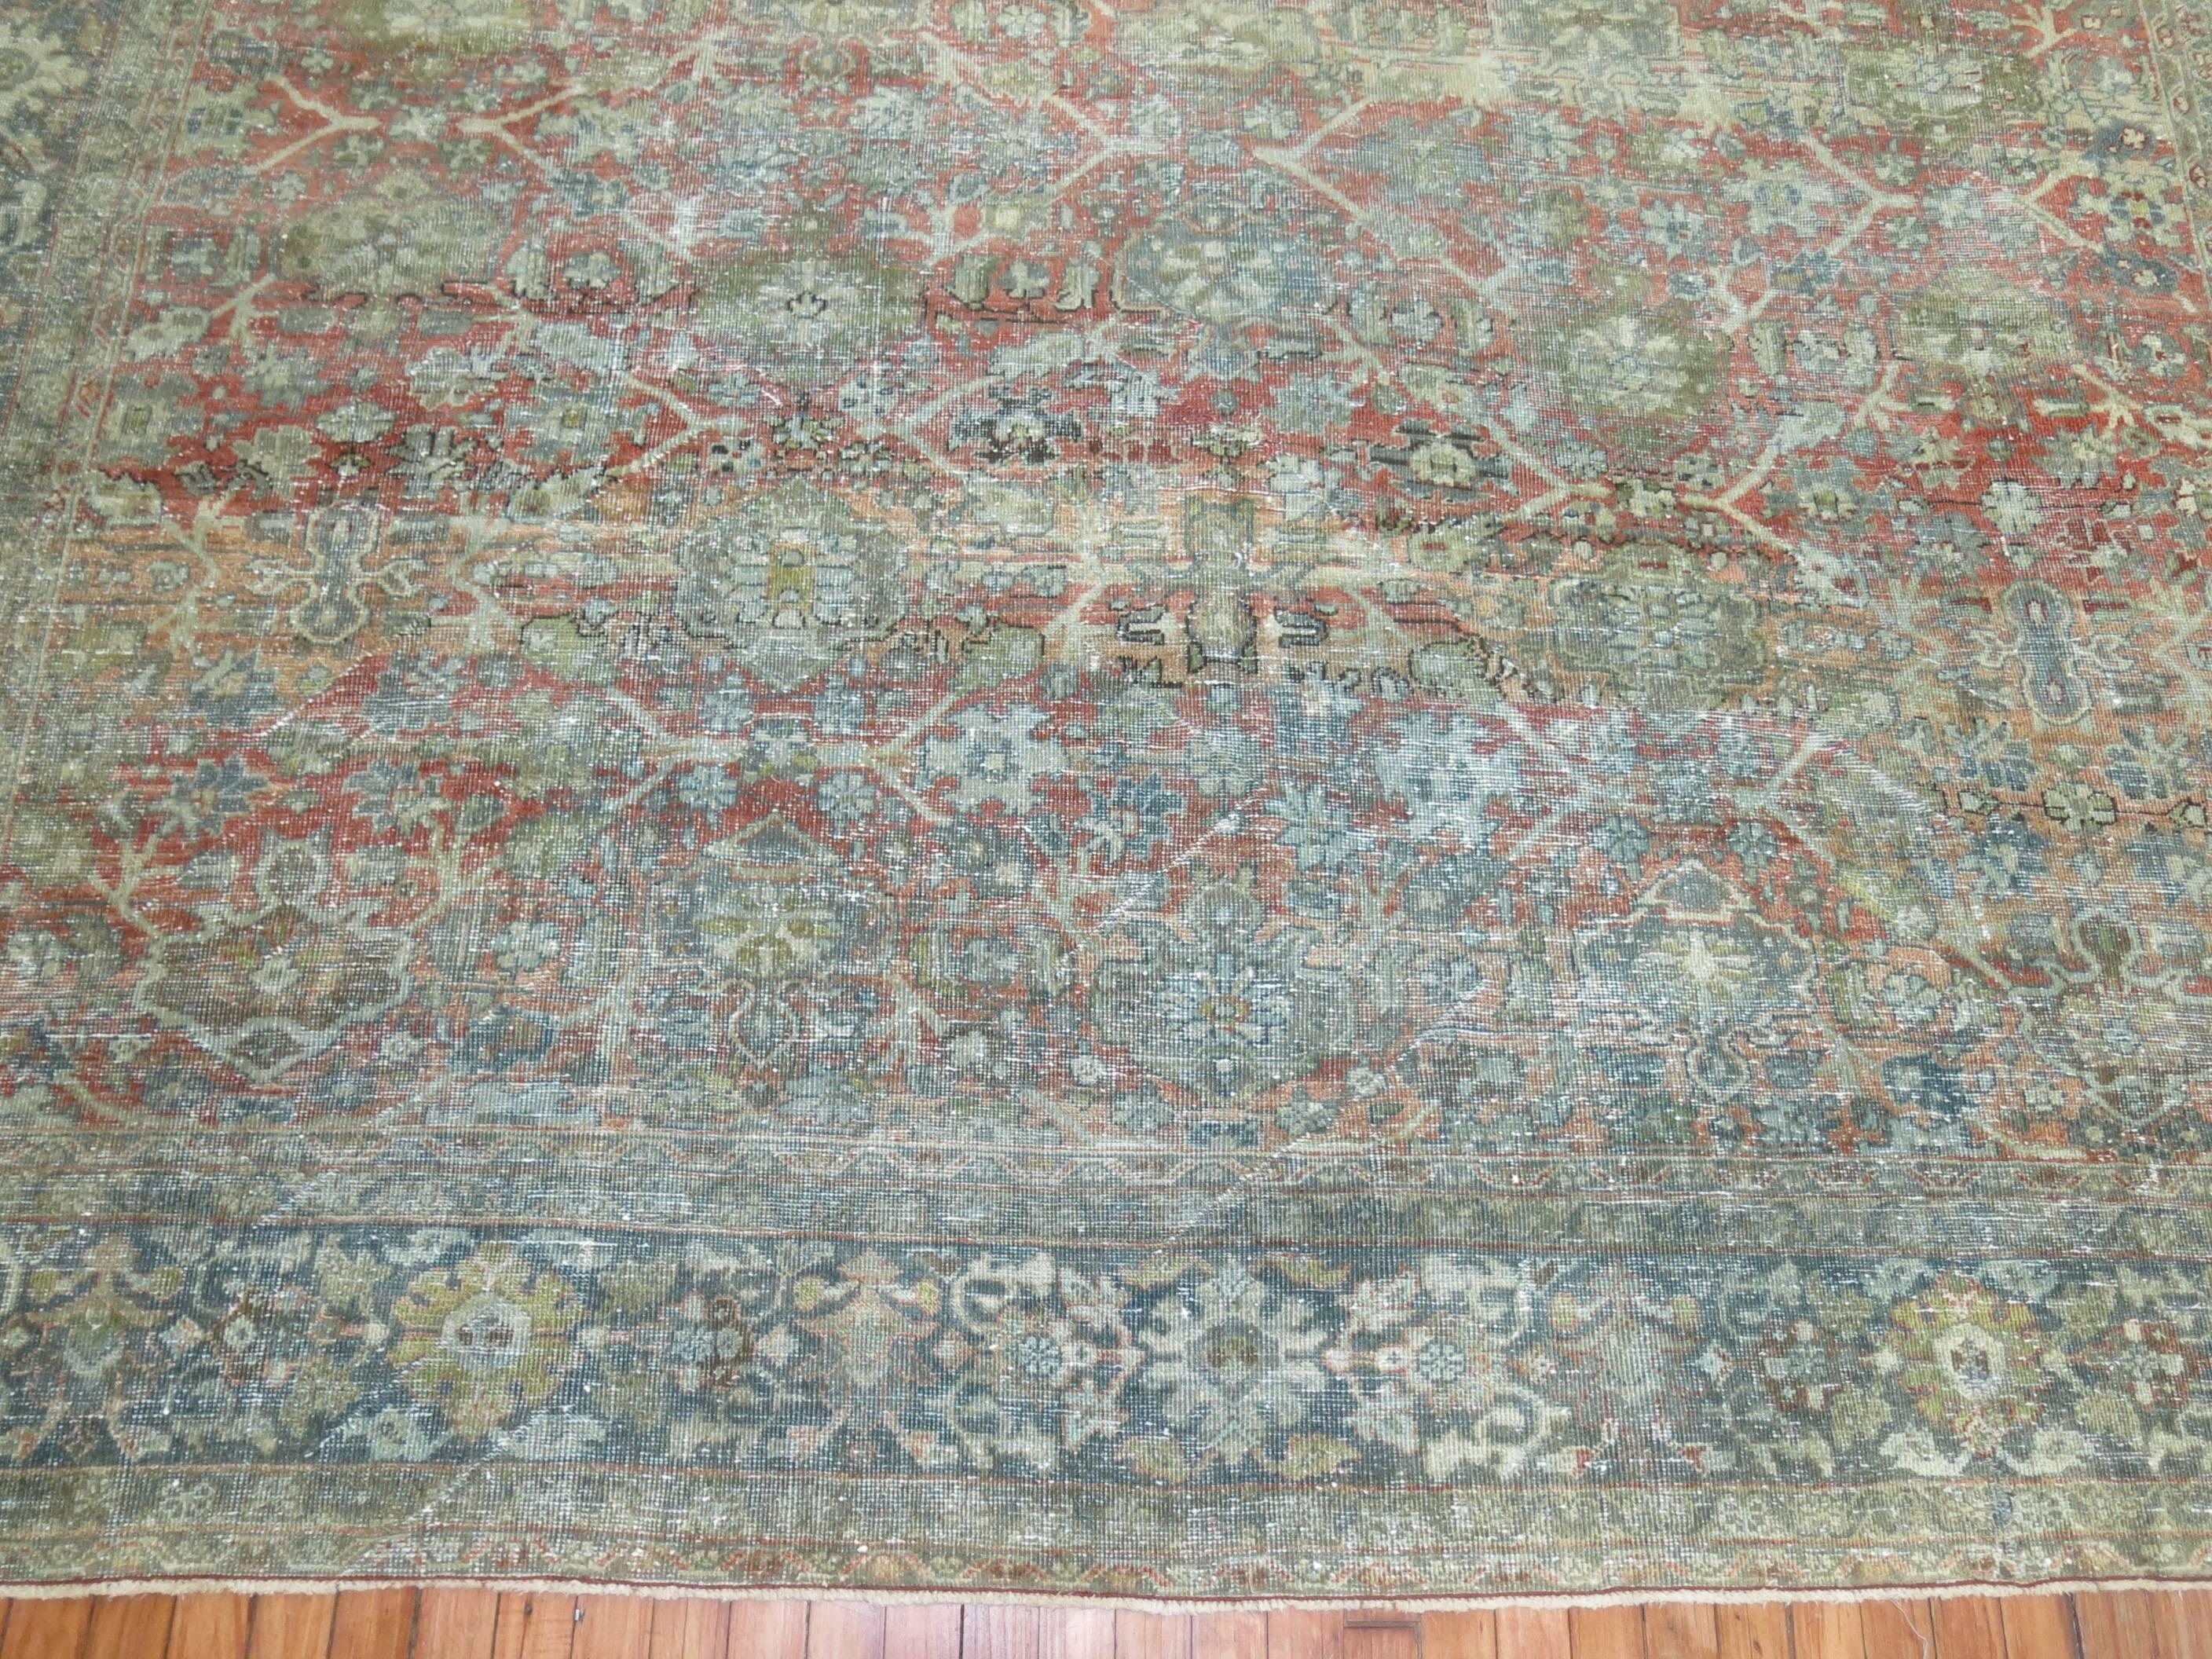 Wool Shabby Chic Persian Traditional Mahal Rug In Terracotta and Sea Foam Tones